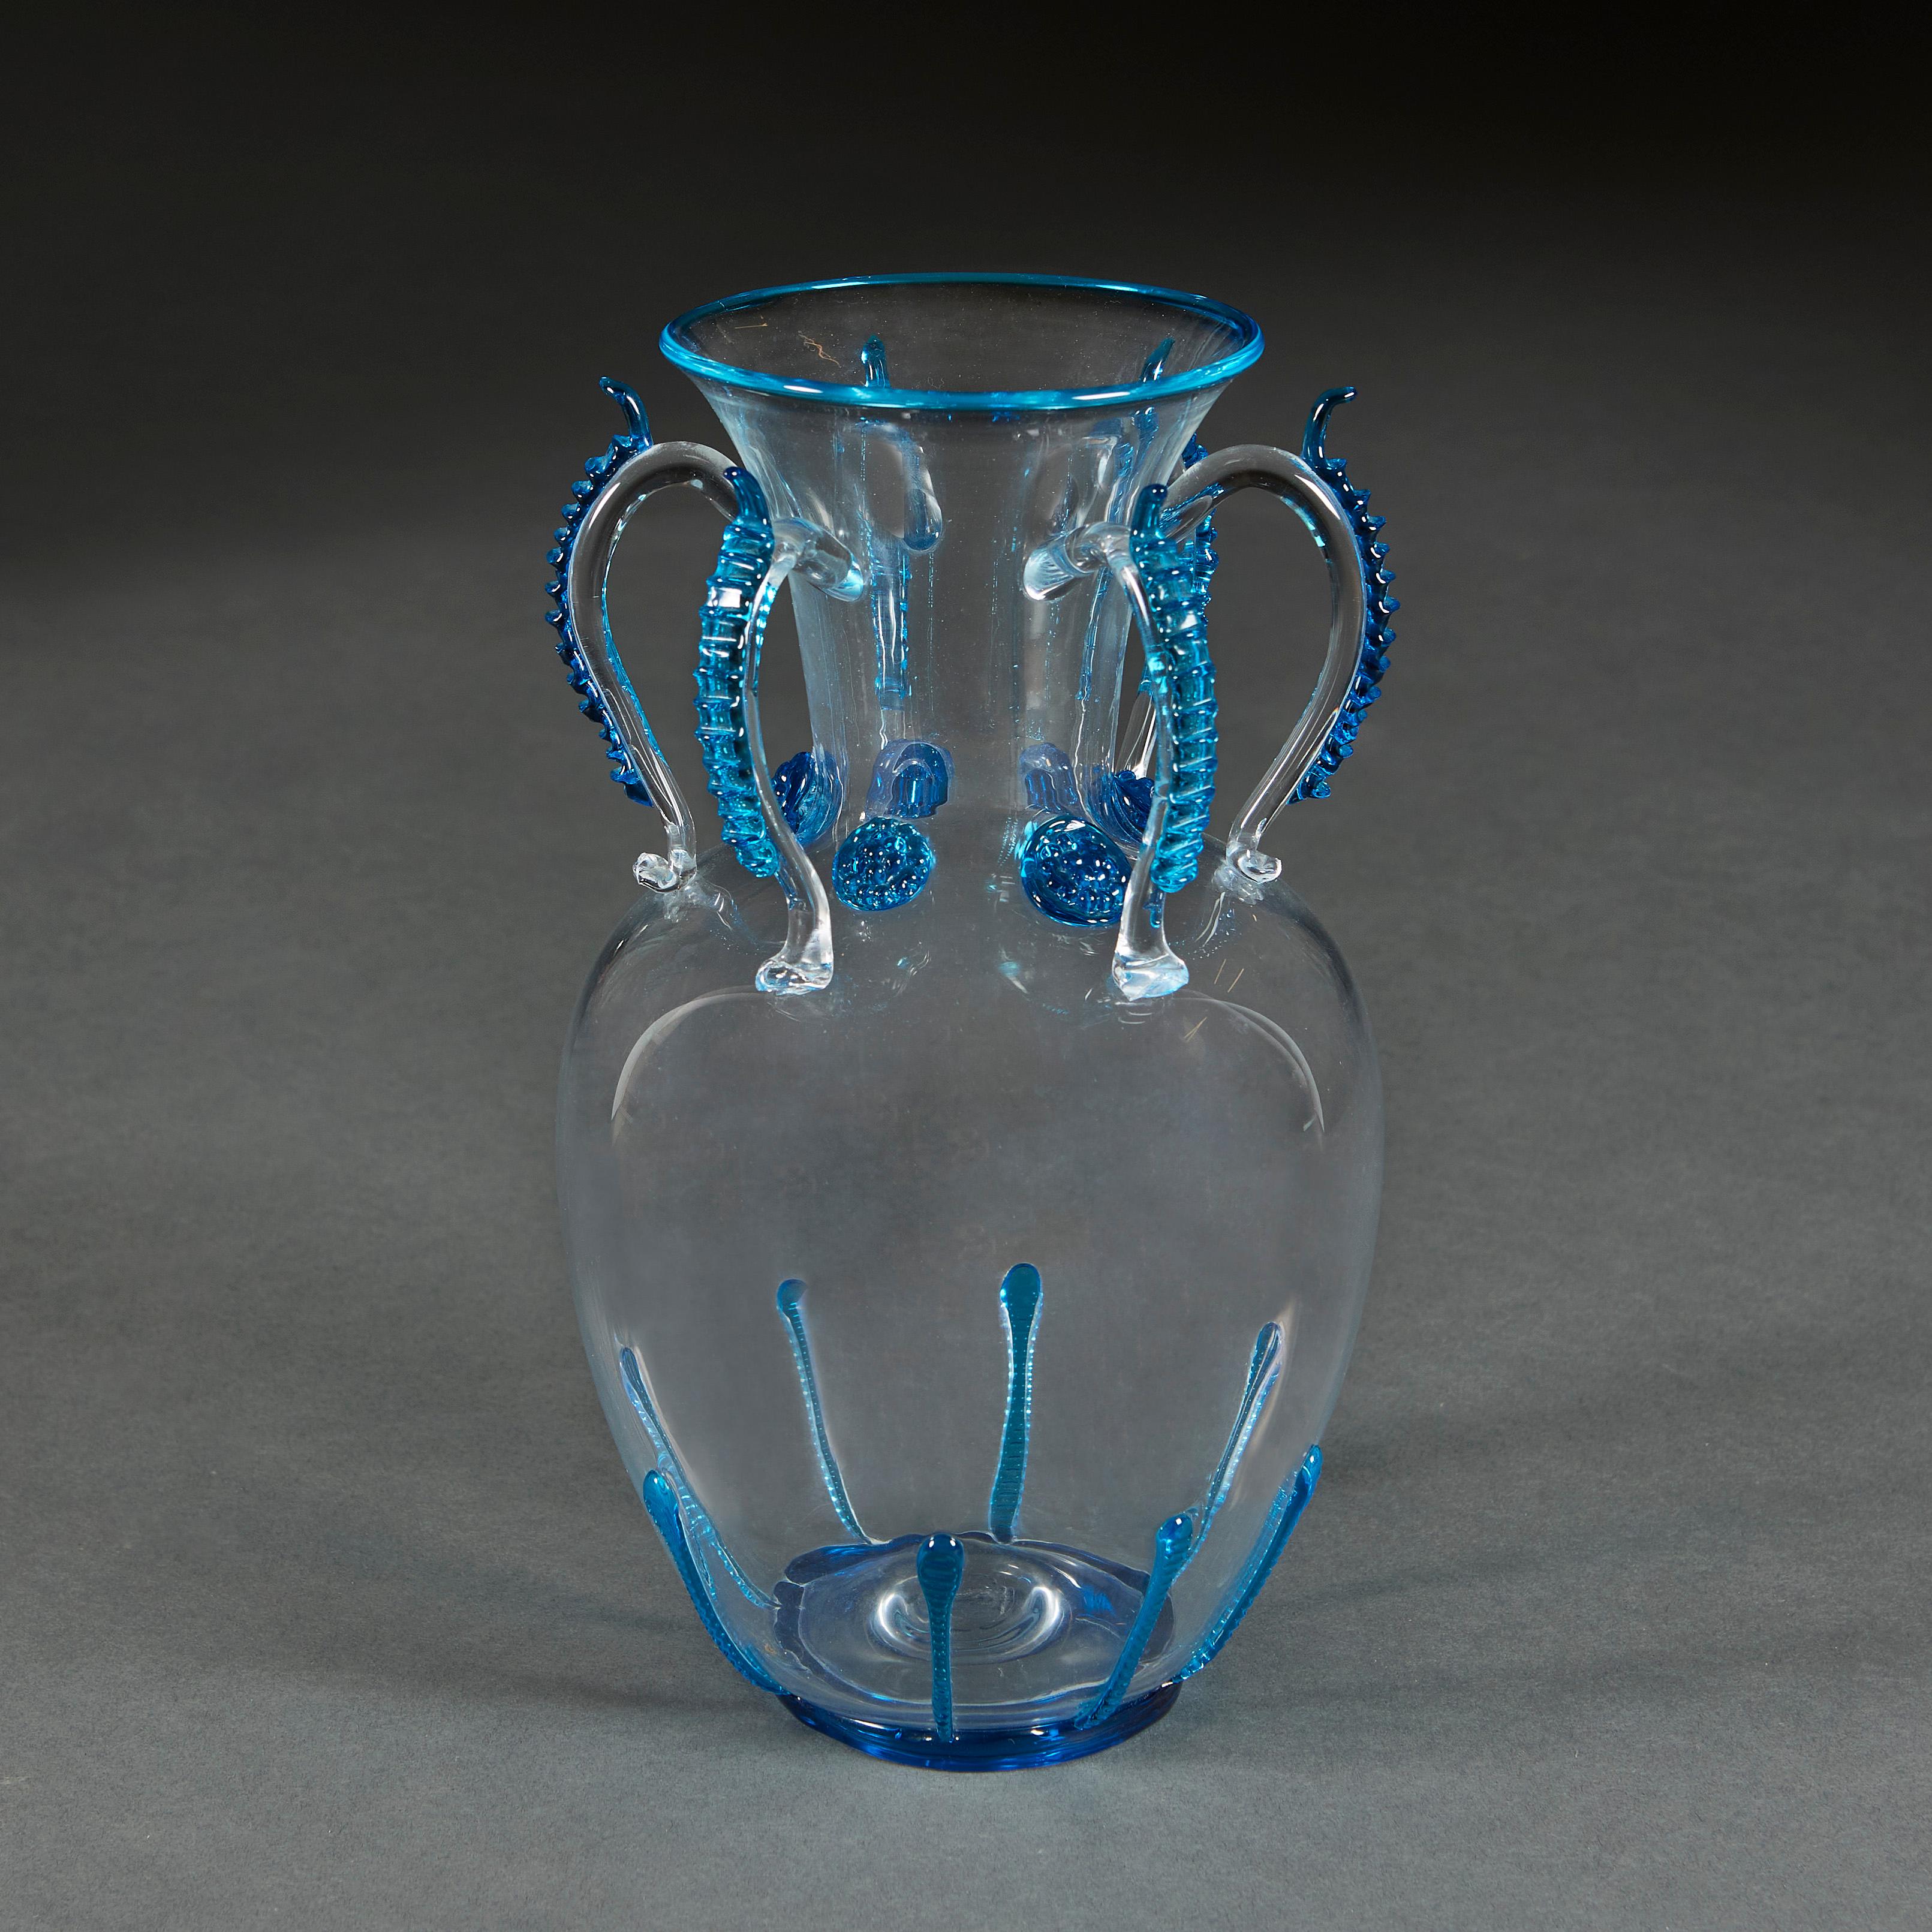 Italy, circa 1960

A Murano glass vase with six loop handles to the neck, with blue glass applique flowers to the neck and drips to the base.

Measures: Height 29.00cm
Total diameter 16.00cm
Diameter of base 9.00cm.